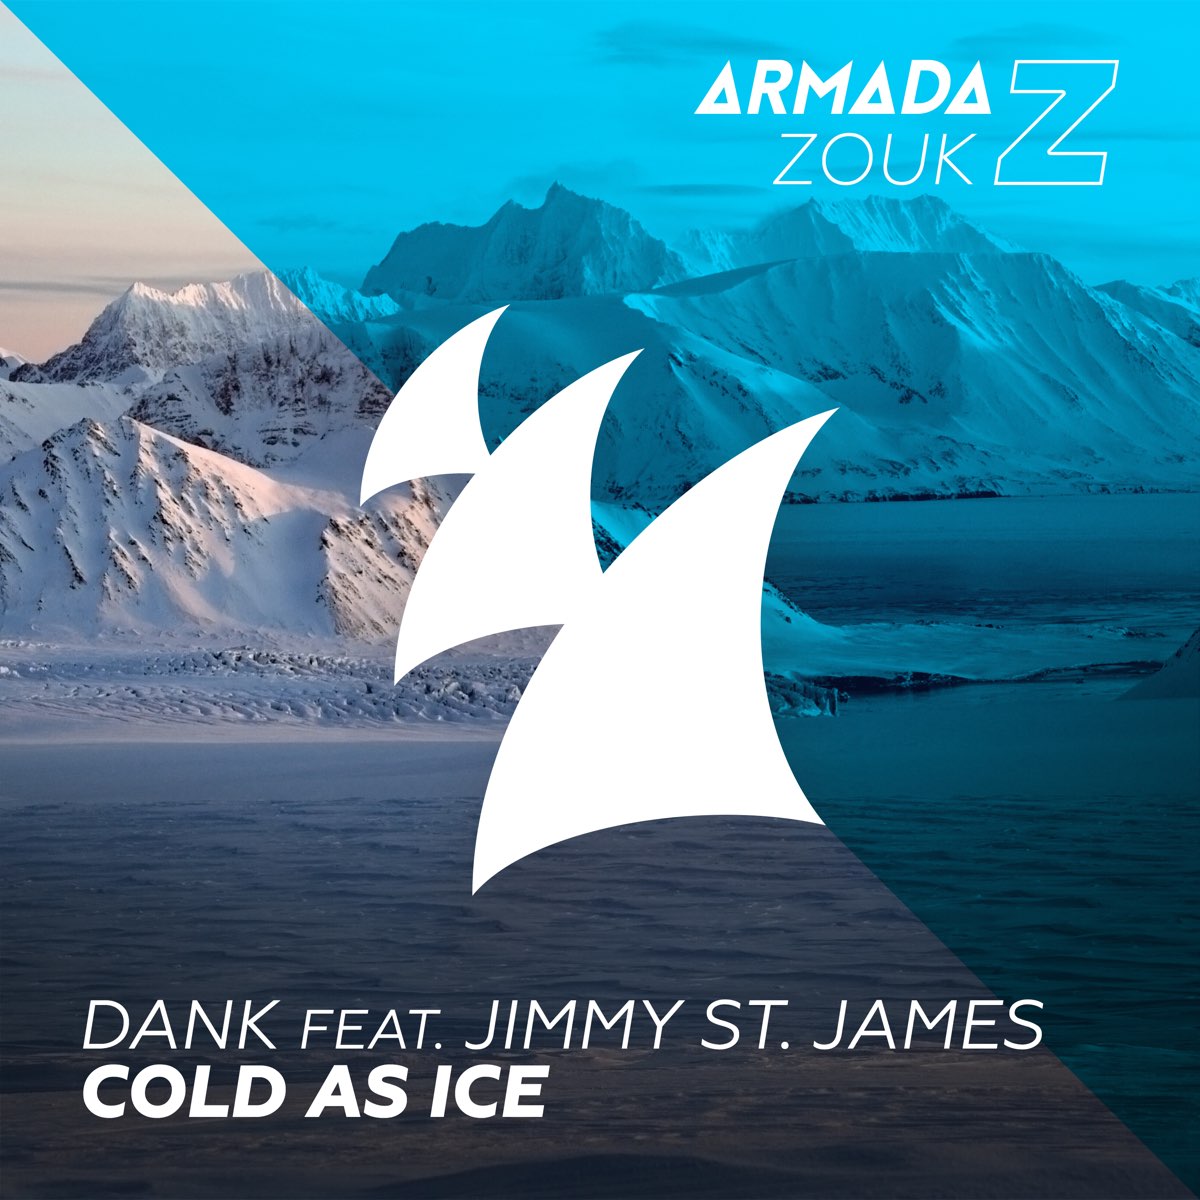 Armada Zouk. Armada Zouk 2016. Armada Zouk 2017. As Cold as Ice. James cold